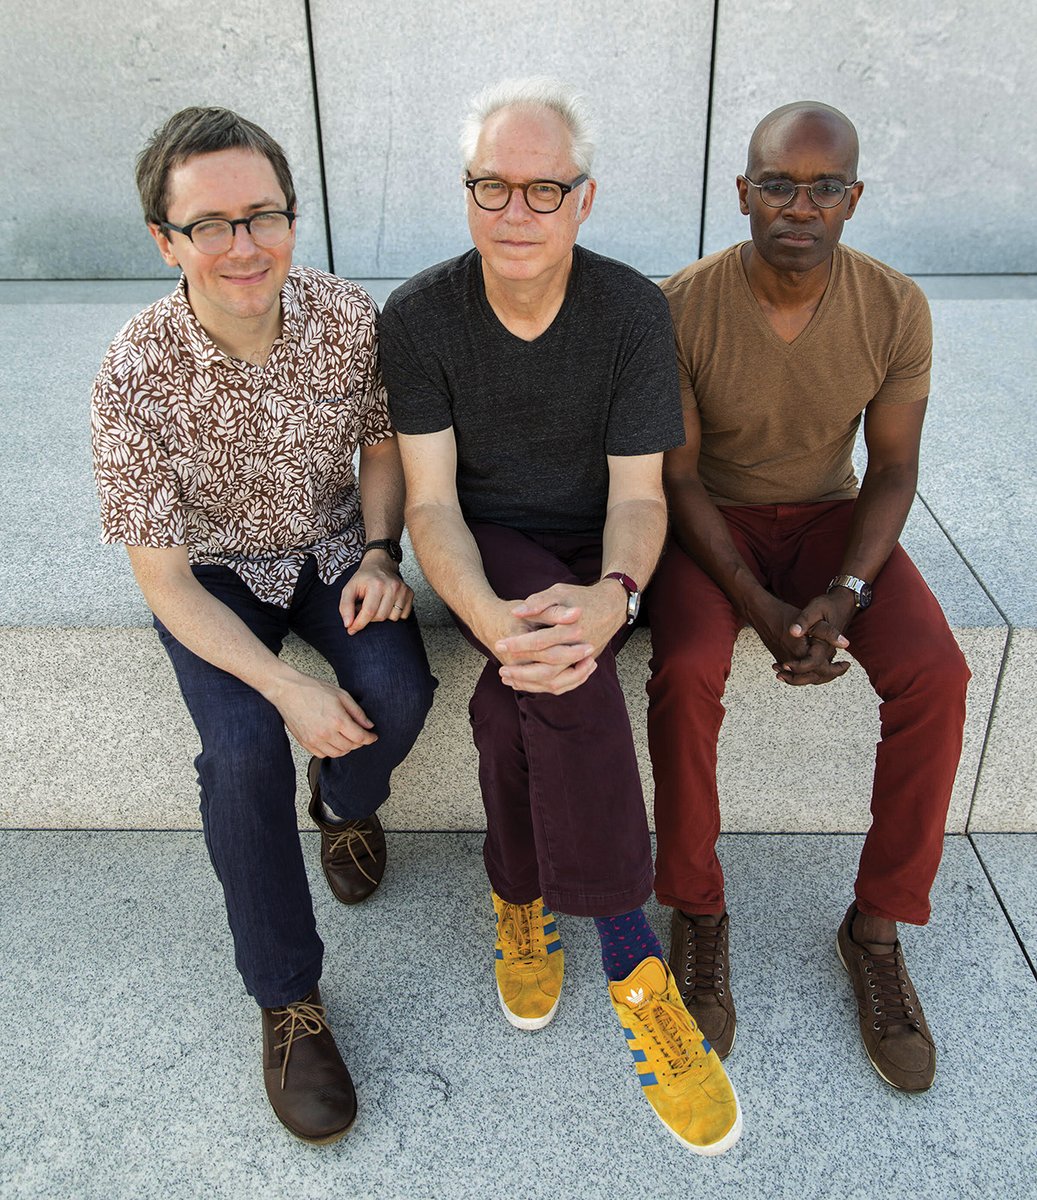 Just announced! PDX Jazz presents Bill Frisell Trio featuring Thomas Morgan & Rudy Royston, June 11 at Alberta Rose Theatre! Tickets on sale this Friday, April 19, at 10AM PST. 🎟️ pdxjazz.org @bill.gristly #pdxjazz #pdx #portland @albertarosepdx